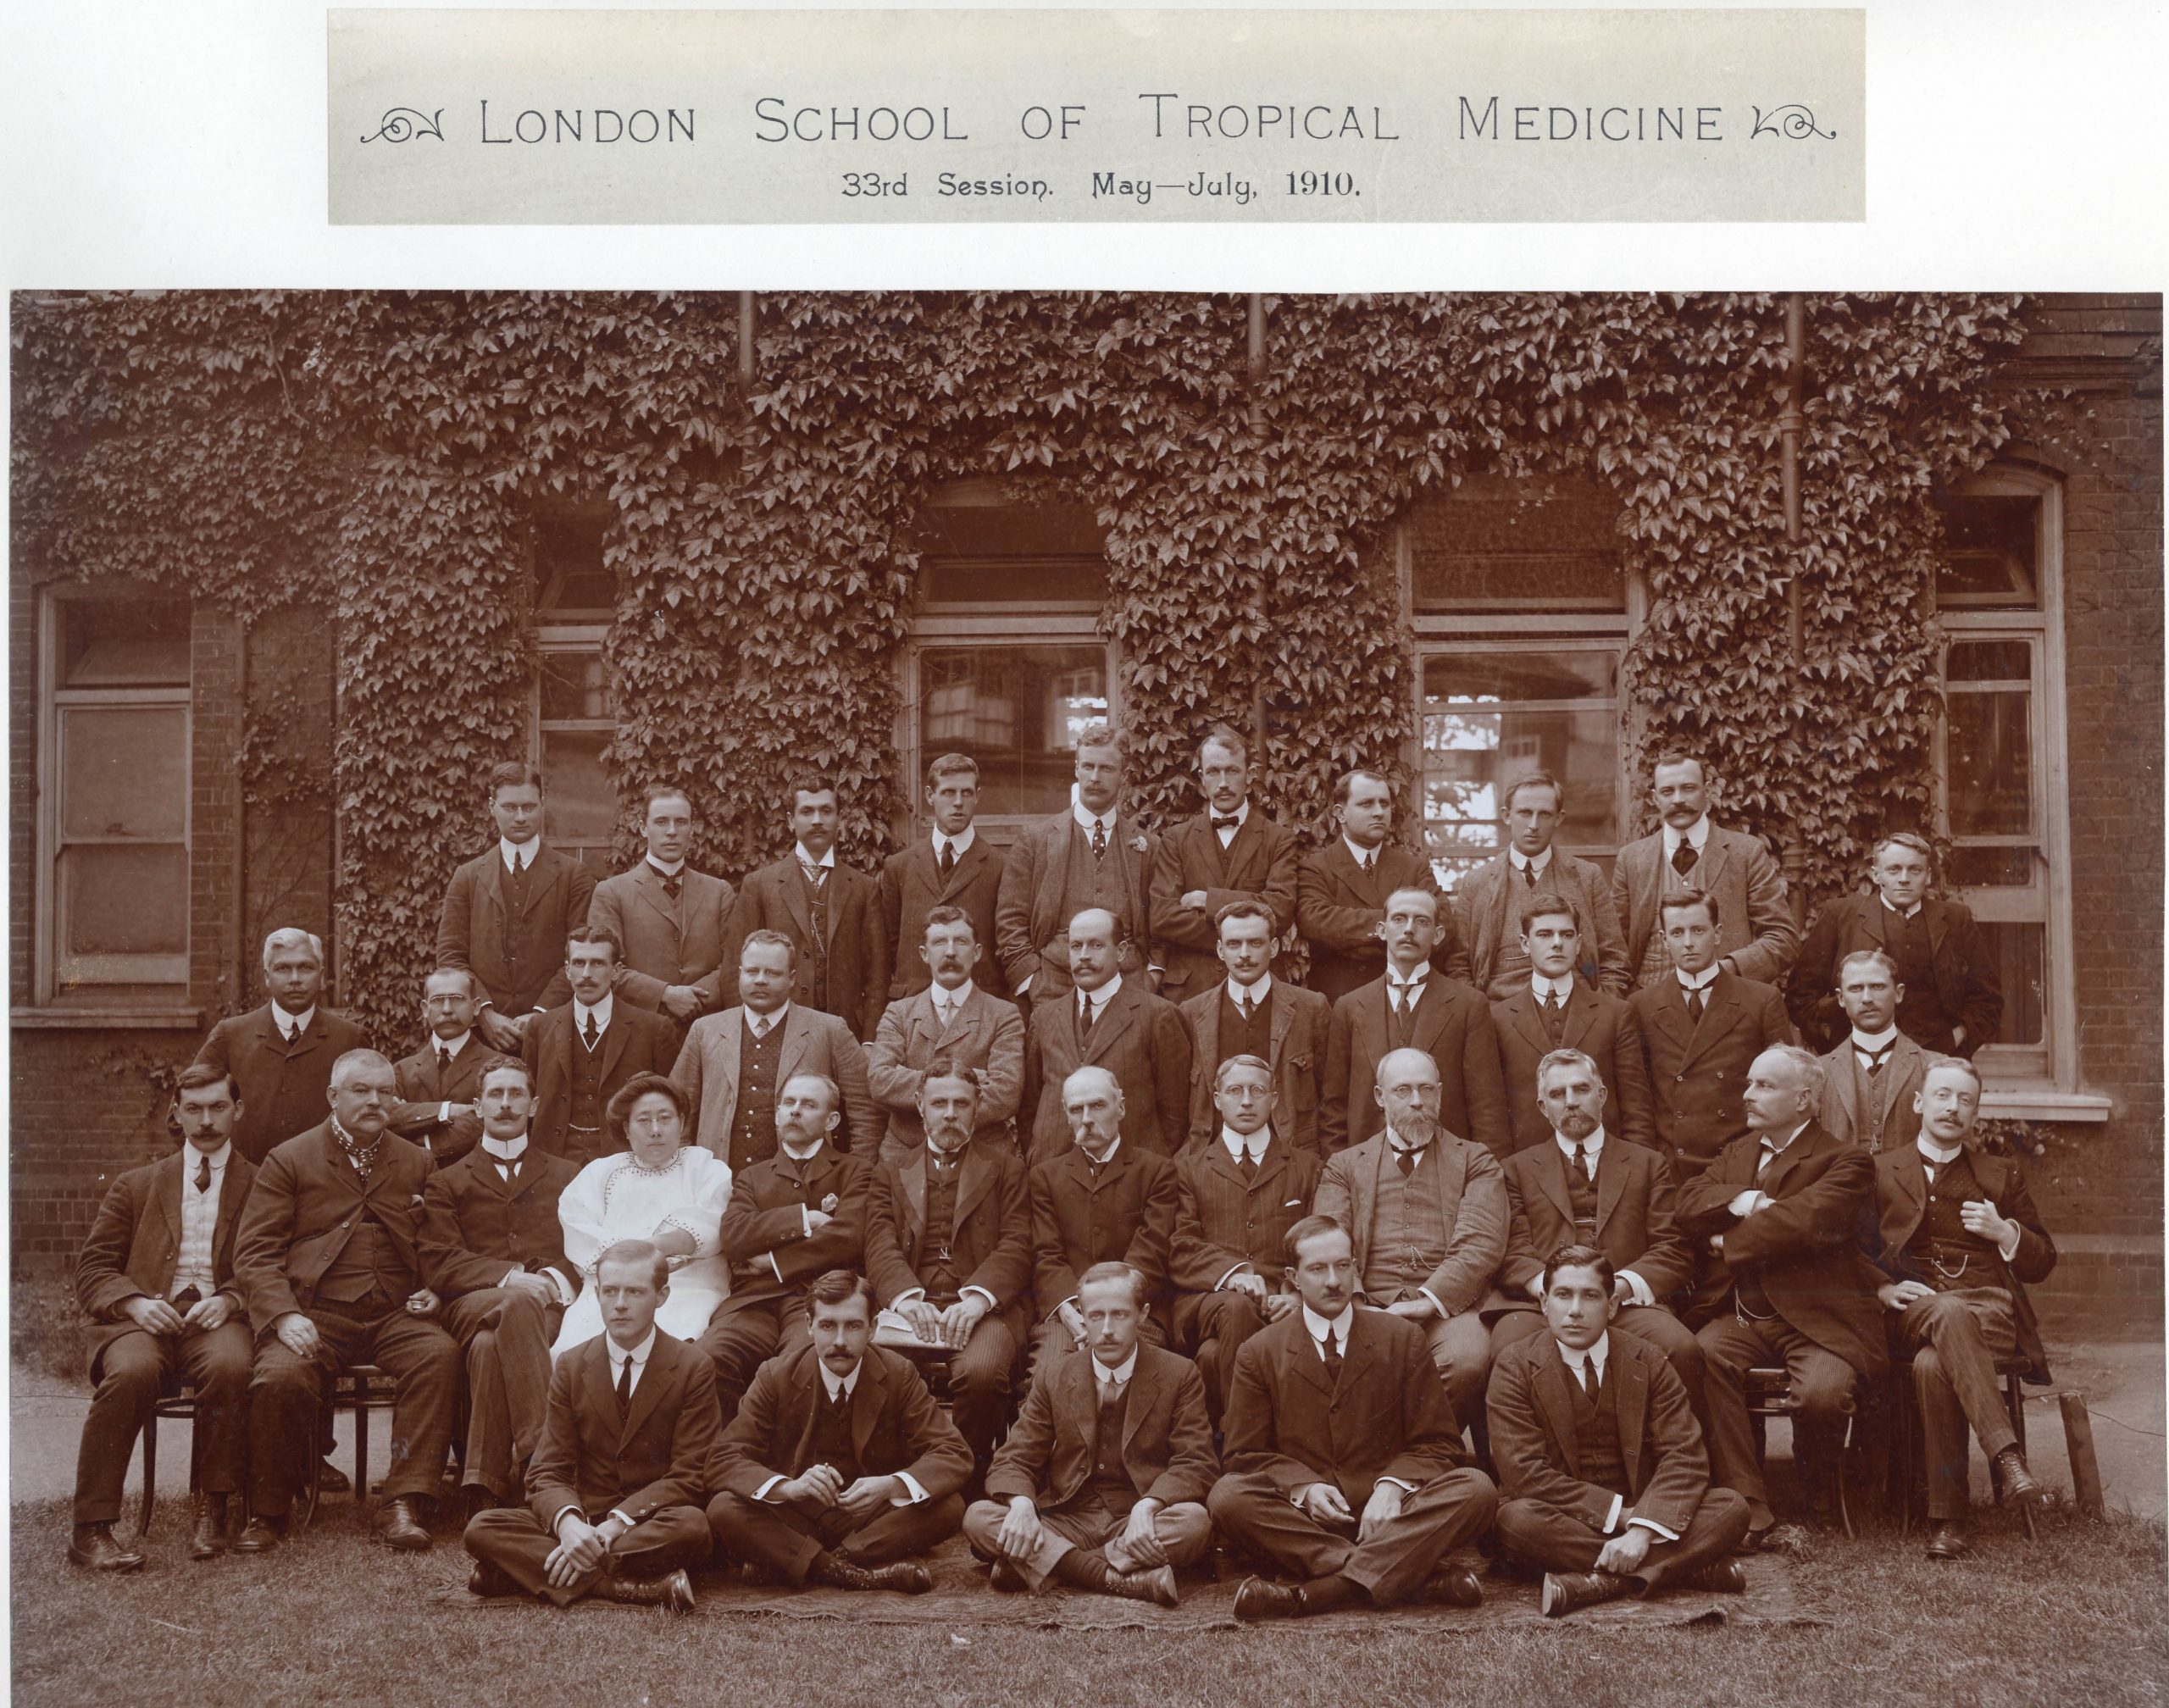 Members of the School 33rd Session May-July 1910